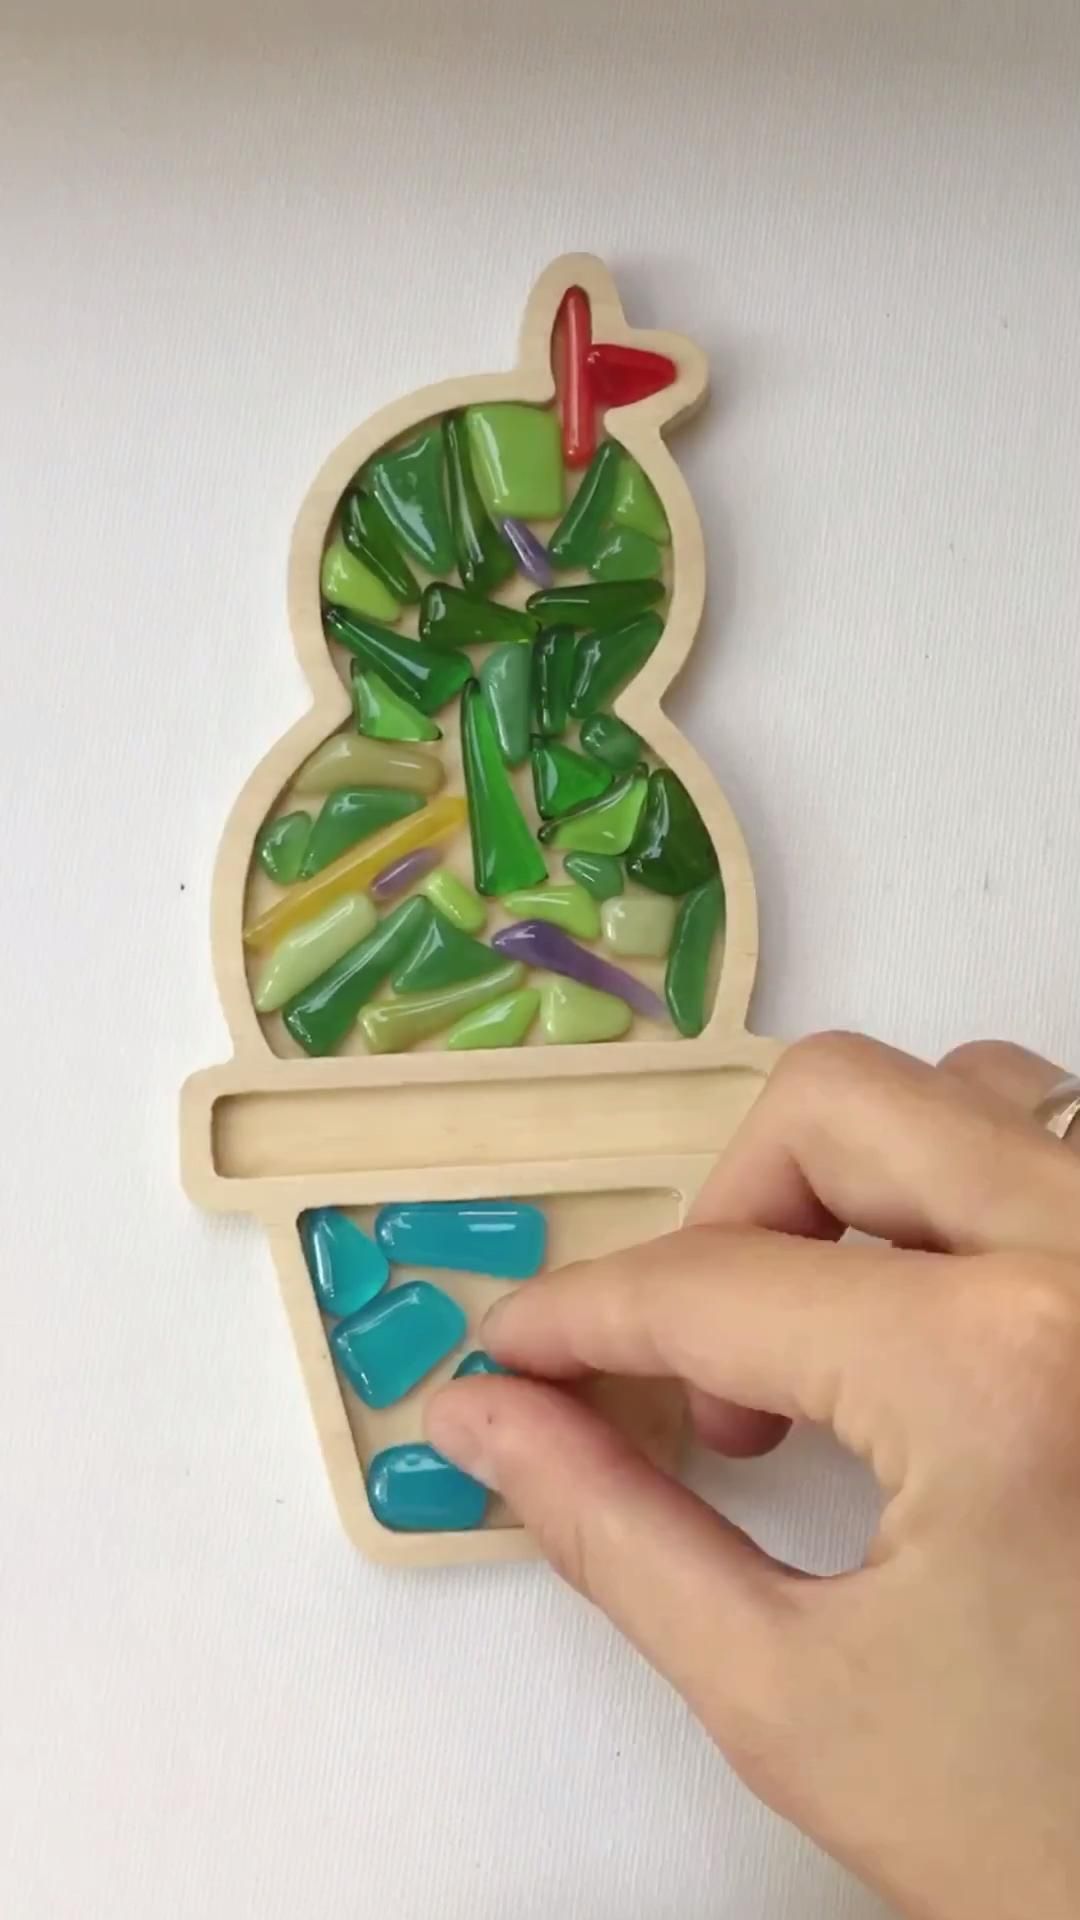 Stained glass art project for kids -